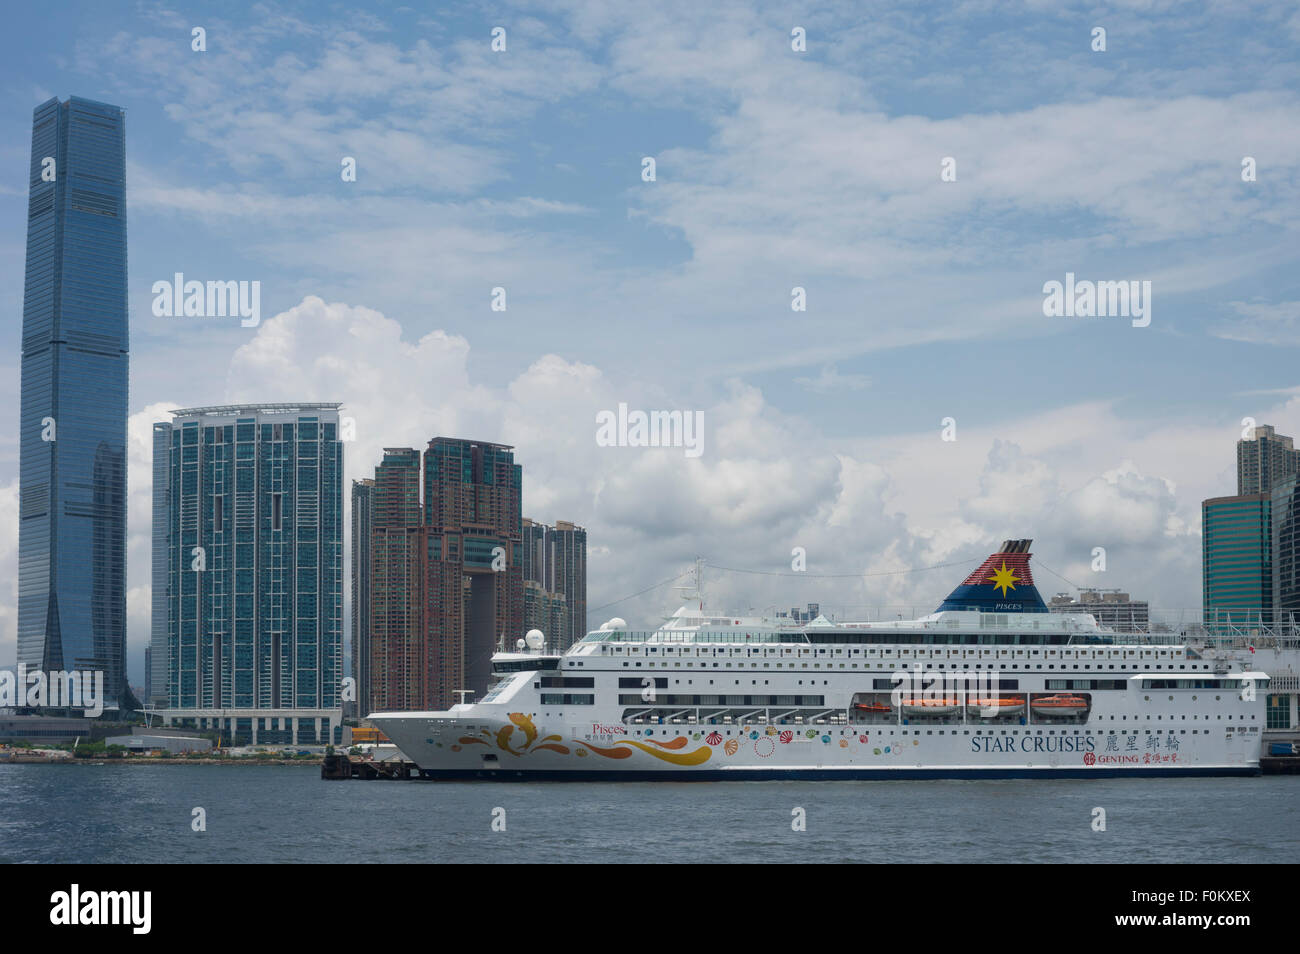 Star Cruises Pisces ship in Hong Kong Port Stock Photo